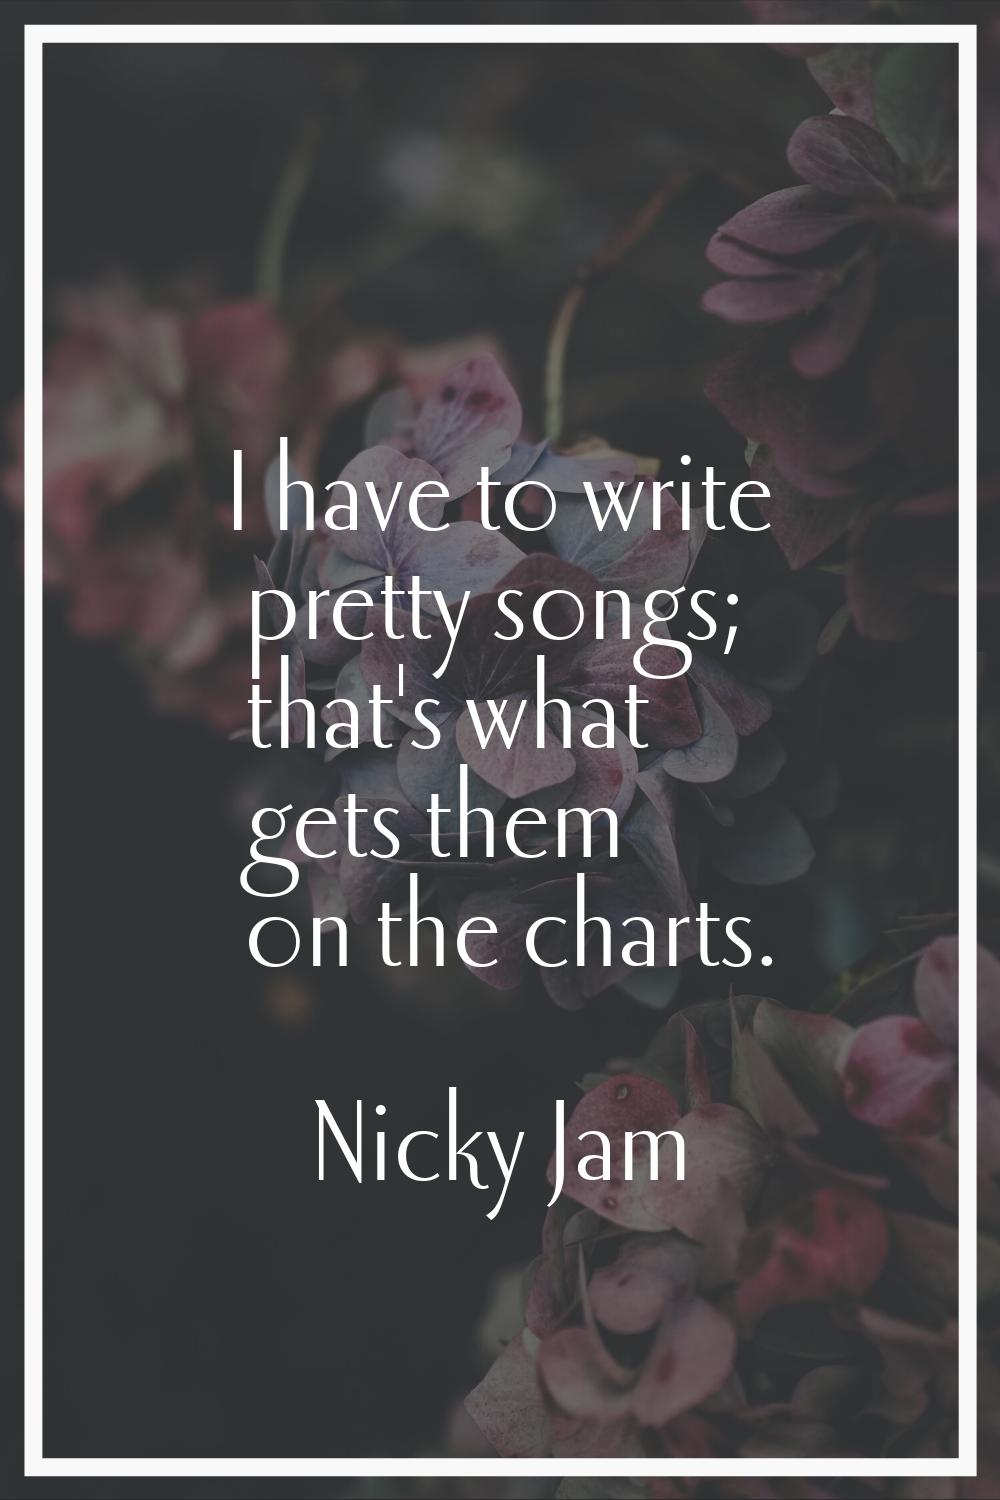 I have to write pretty songs; that's what gets them on the charts.